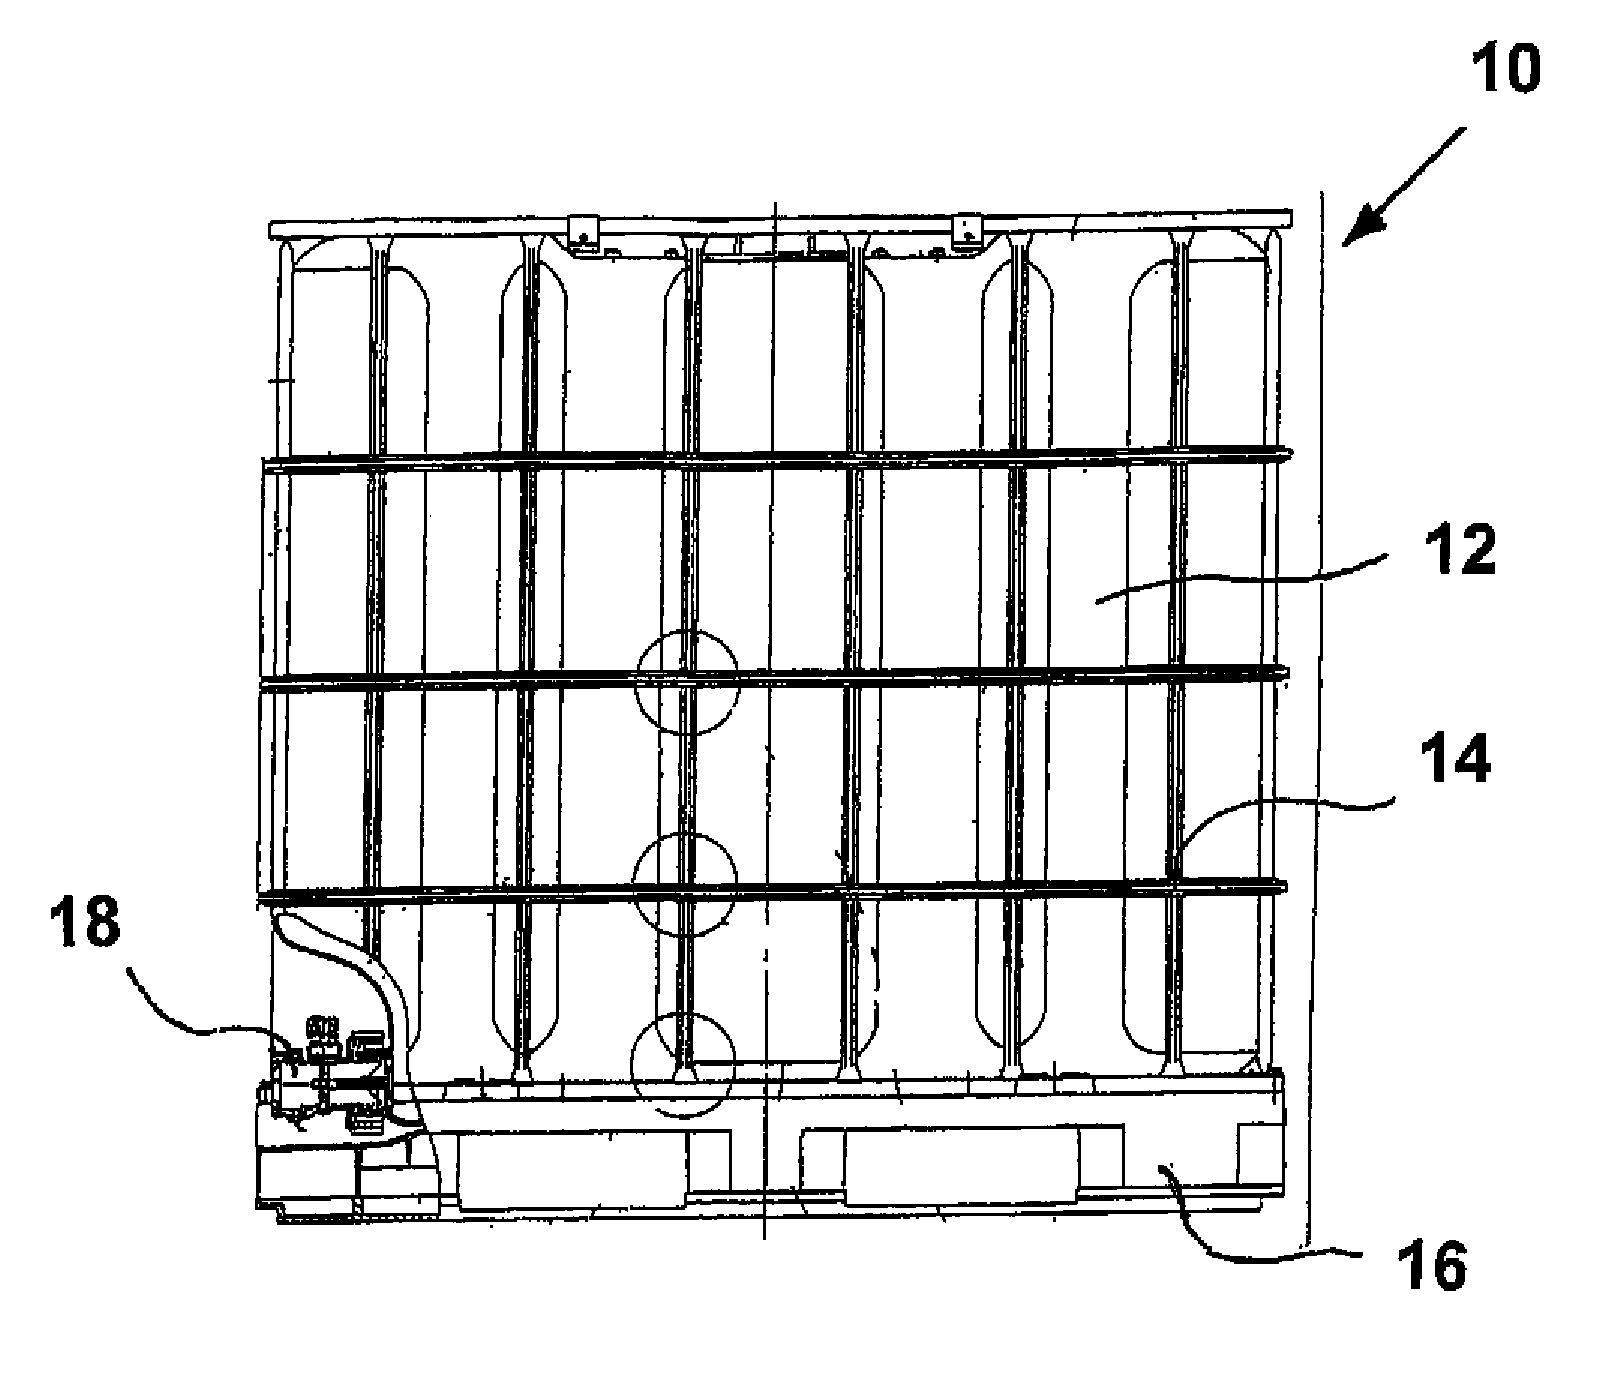 Pallet container, and method for producing an electrostatically non-chargeable and/or electric charge-draining pallet container